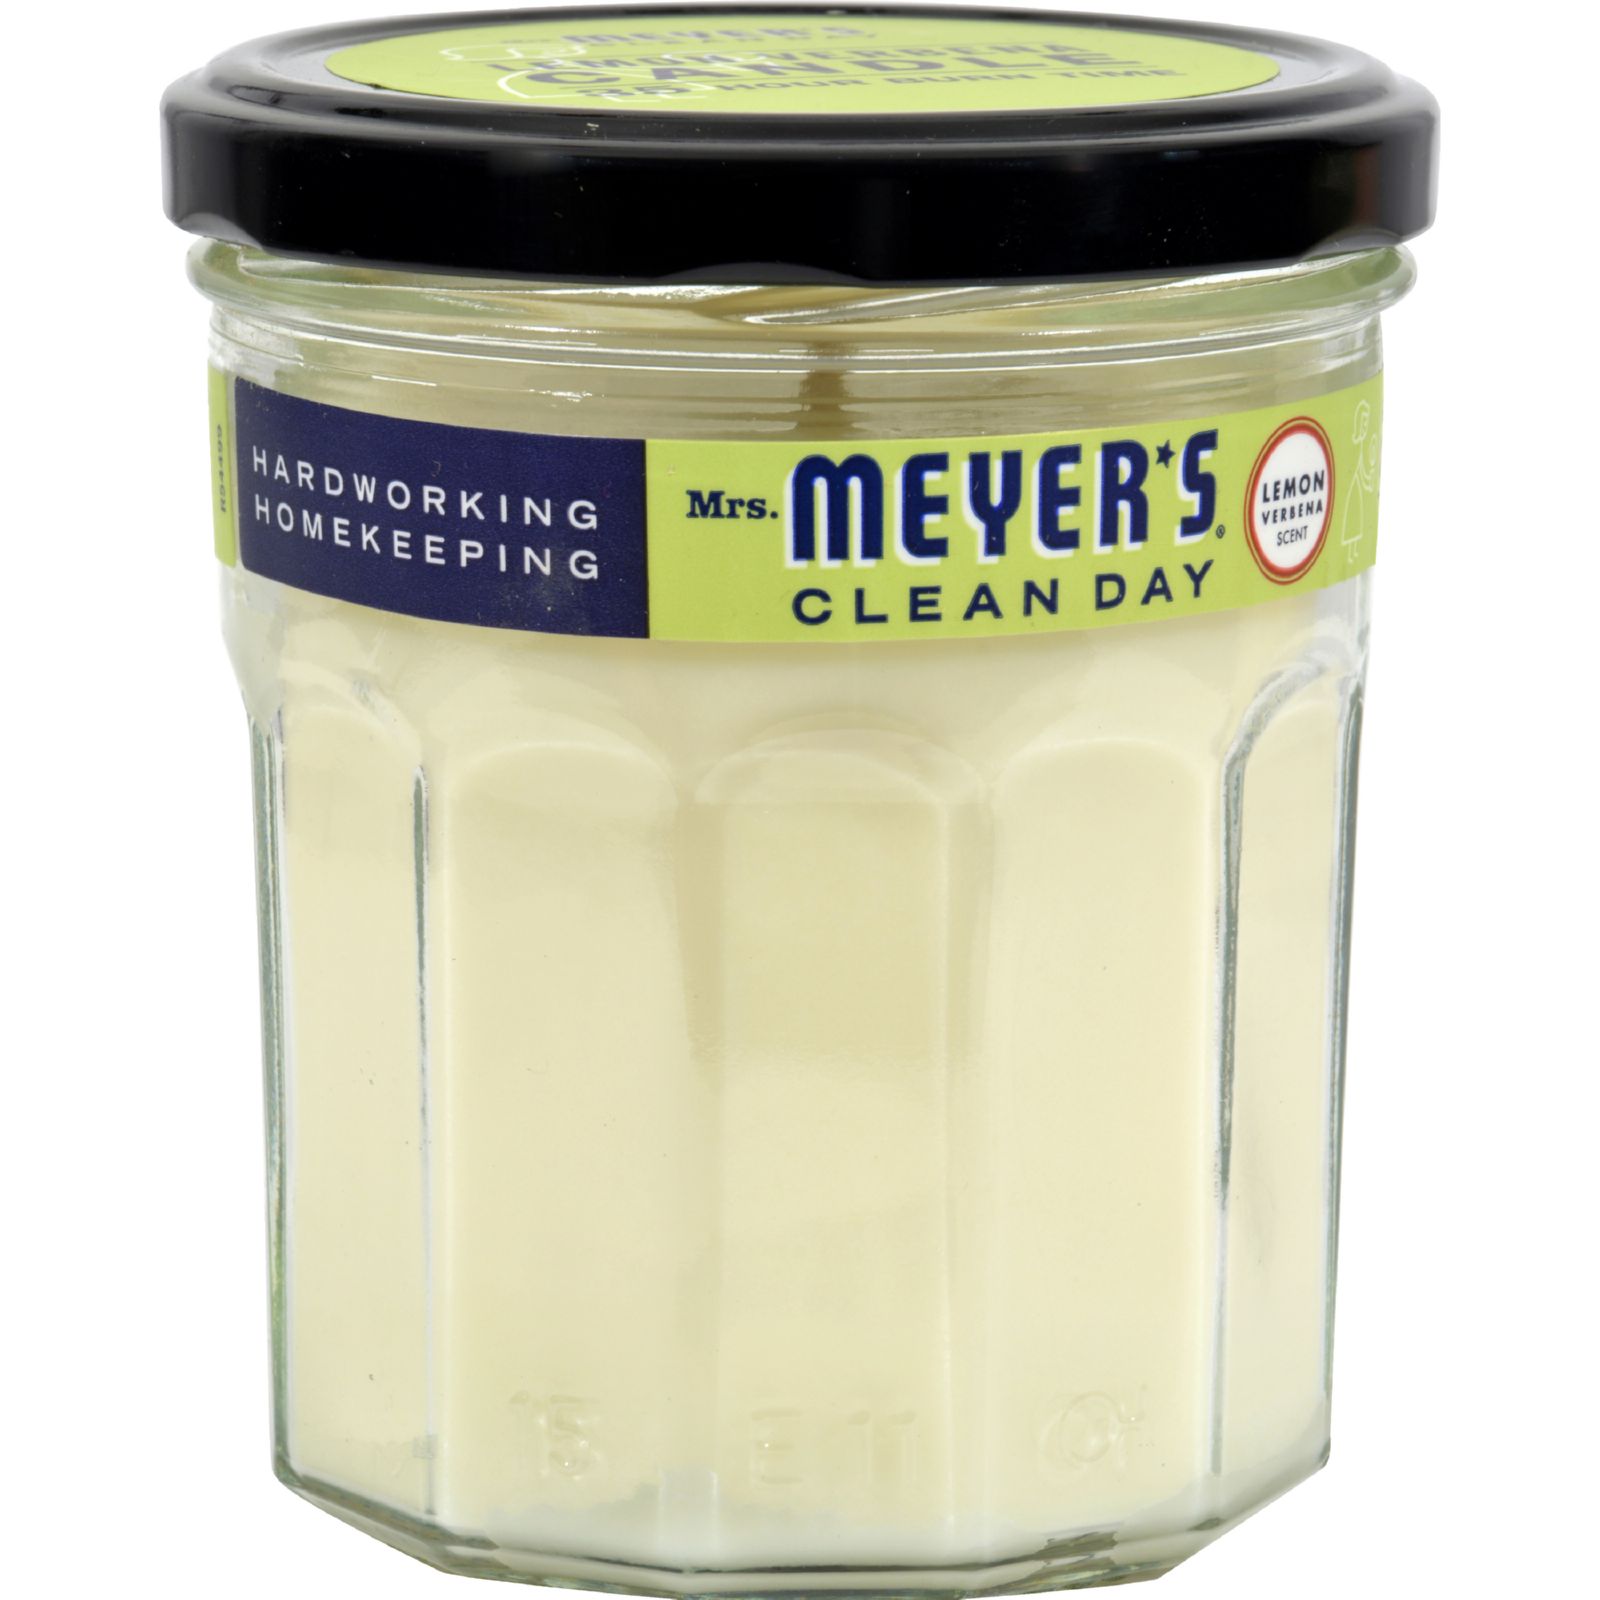 Mrs Pack of 6 Meyer's 43116 Clean Day Geranium Scent Soy Candle 7.2 oz. 